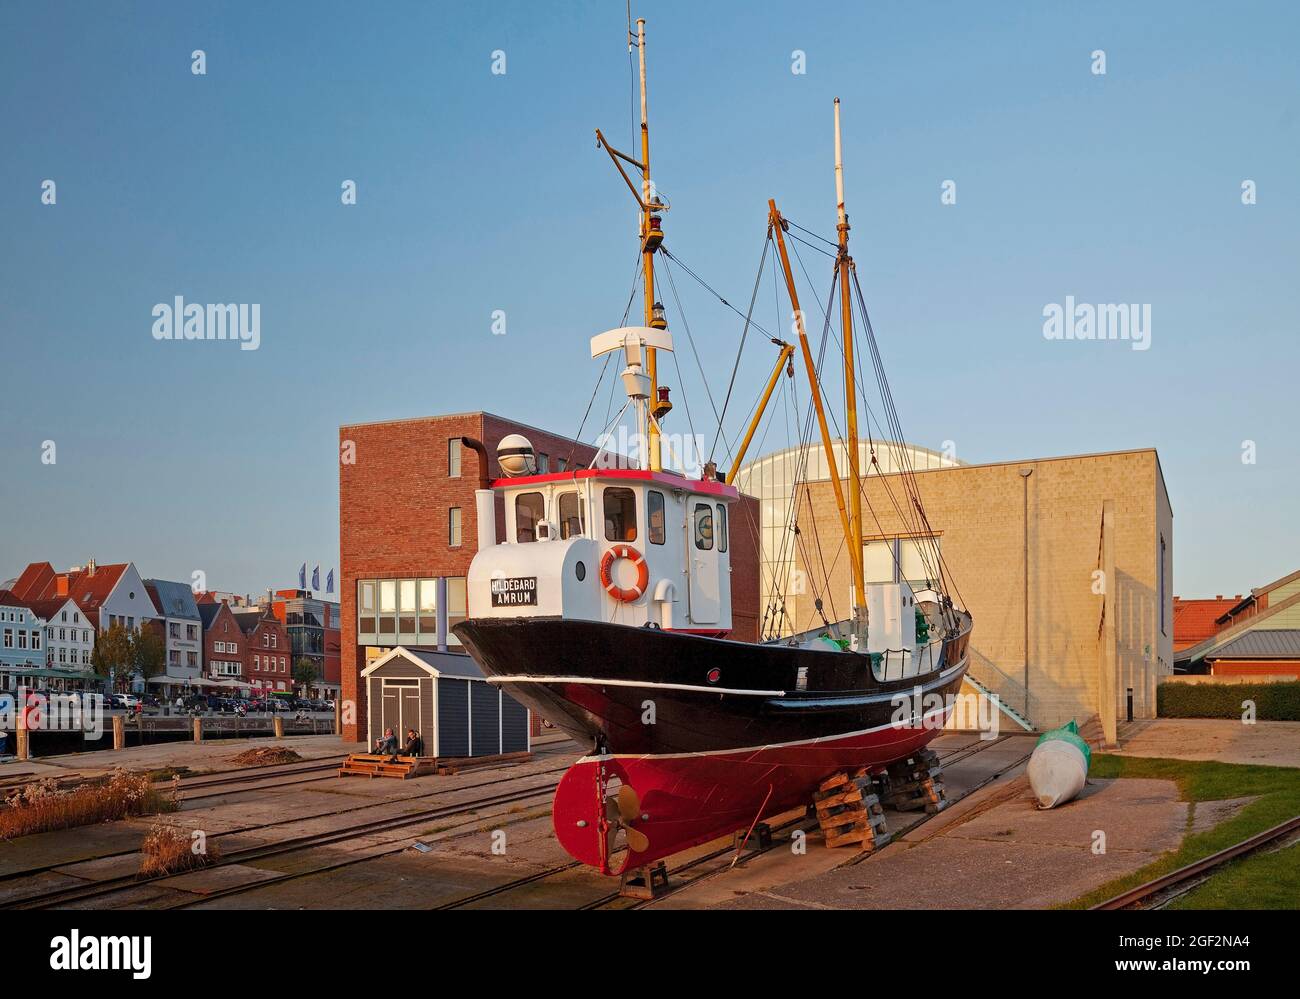 Hildegard buoy tender, museum ship in the inland port, behind it the New Town Hall , Germany, Schleswig-Holstein, Northern Frisia, Husum Stock Photo